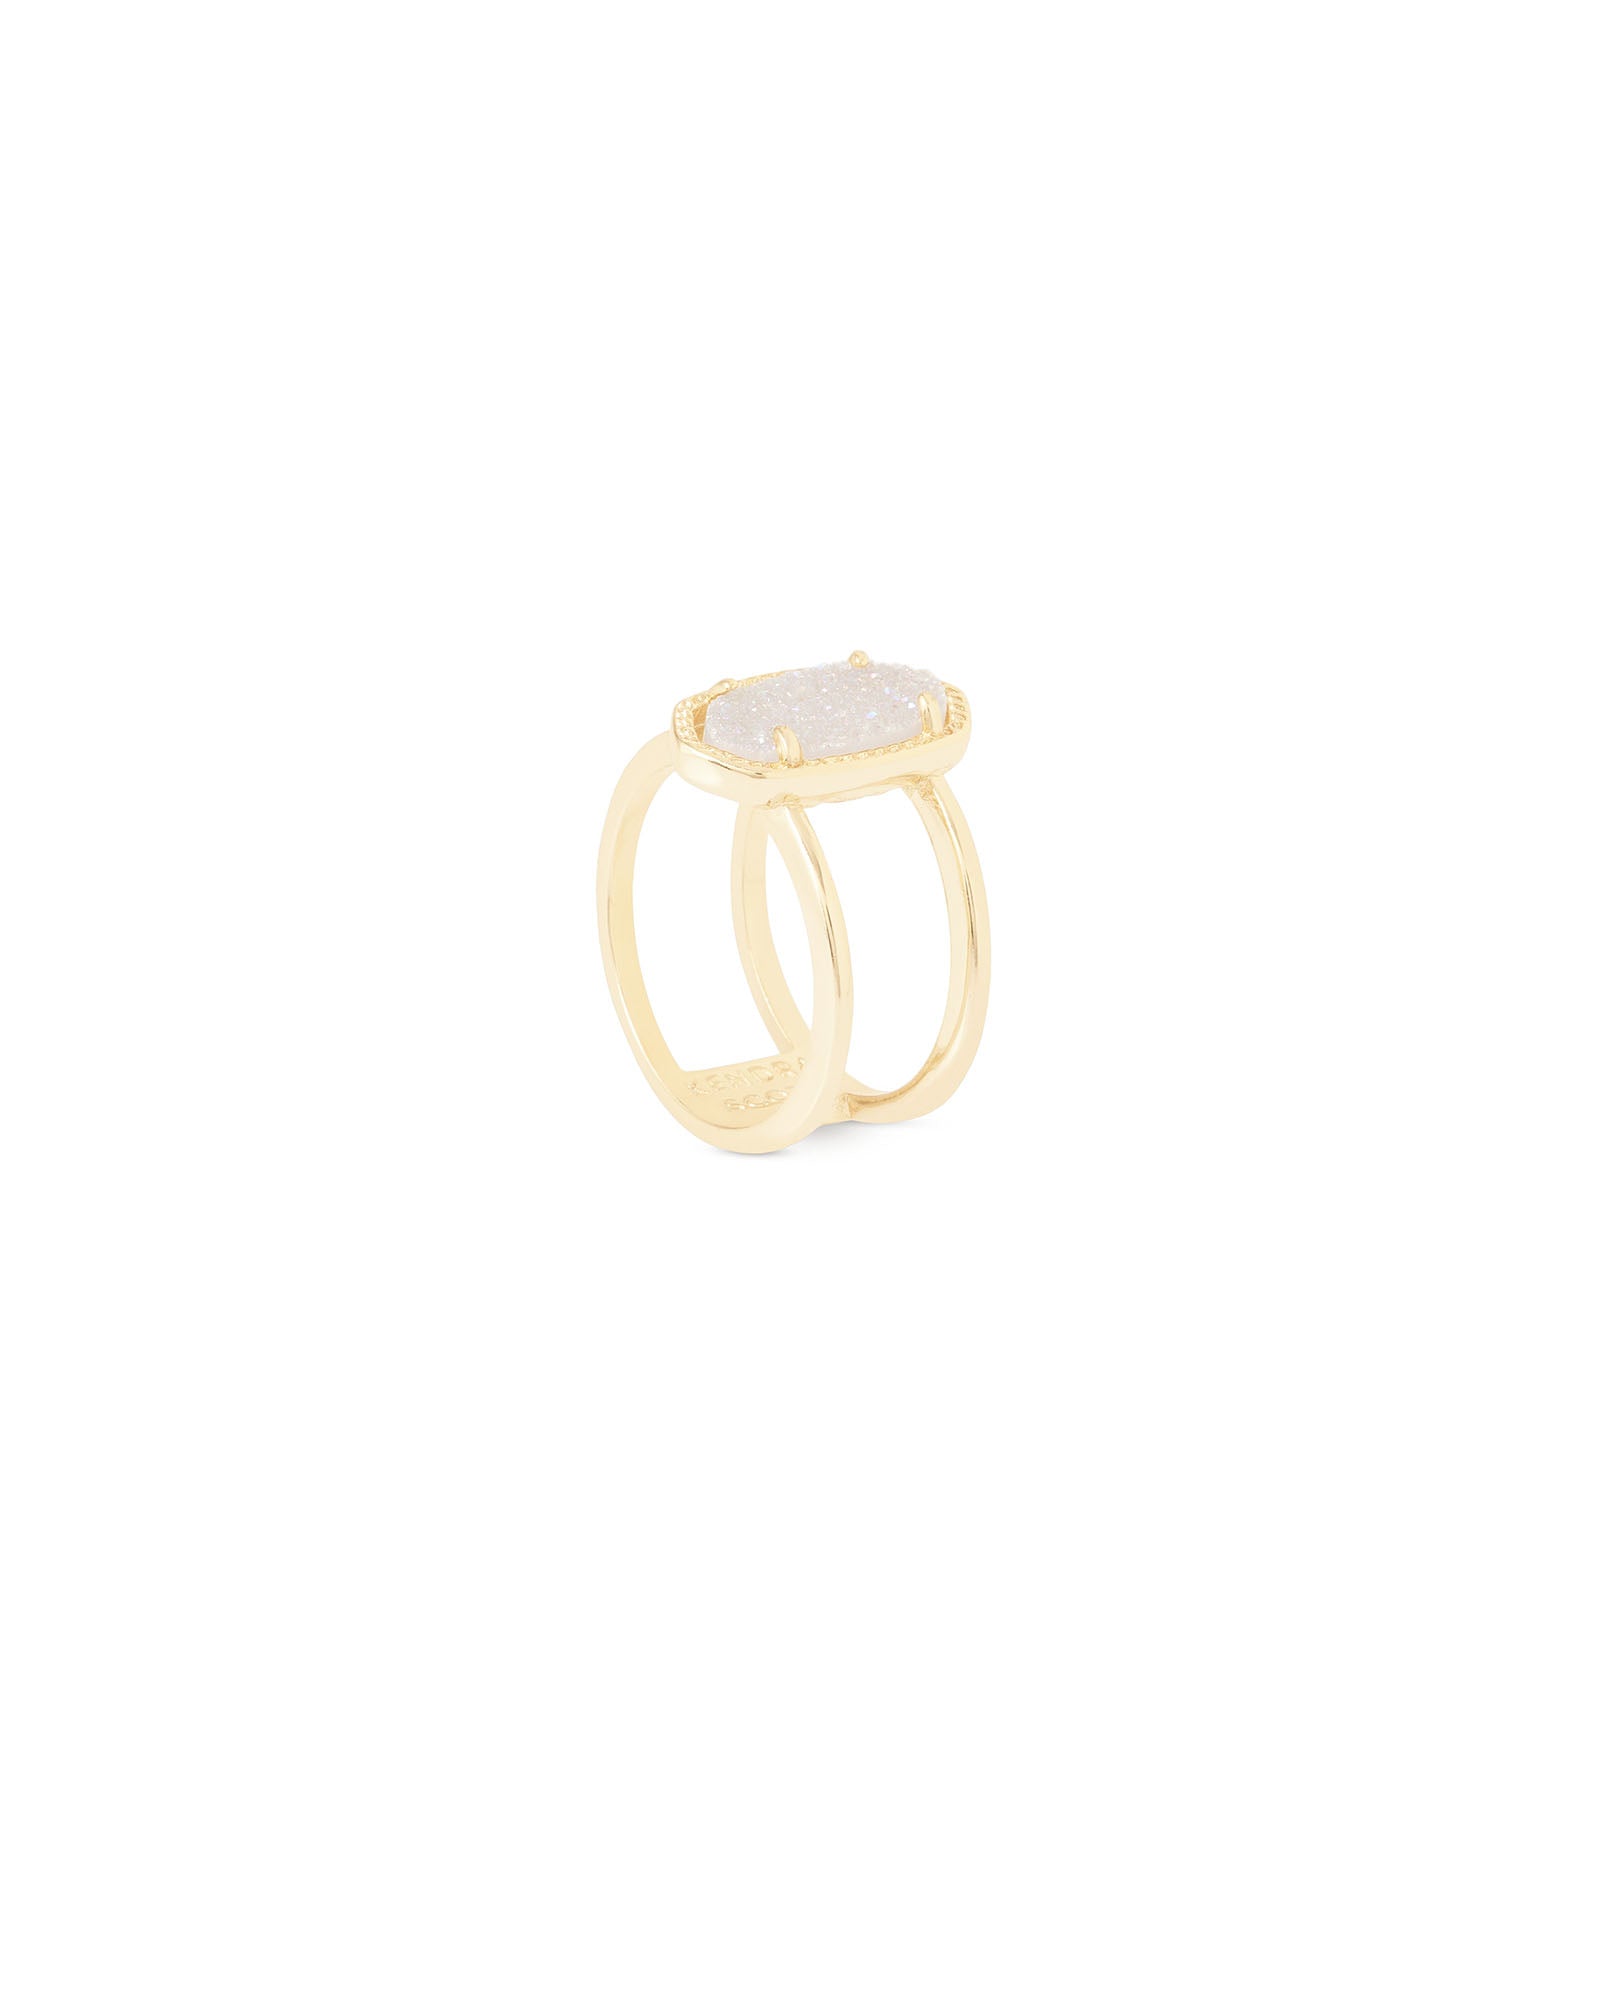 Elyse Ring - Iridescent Drusy in Gold